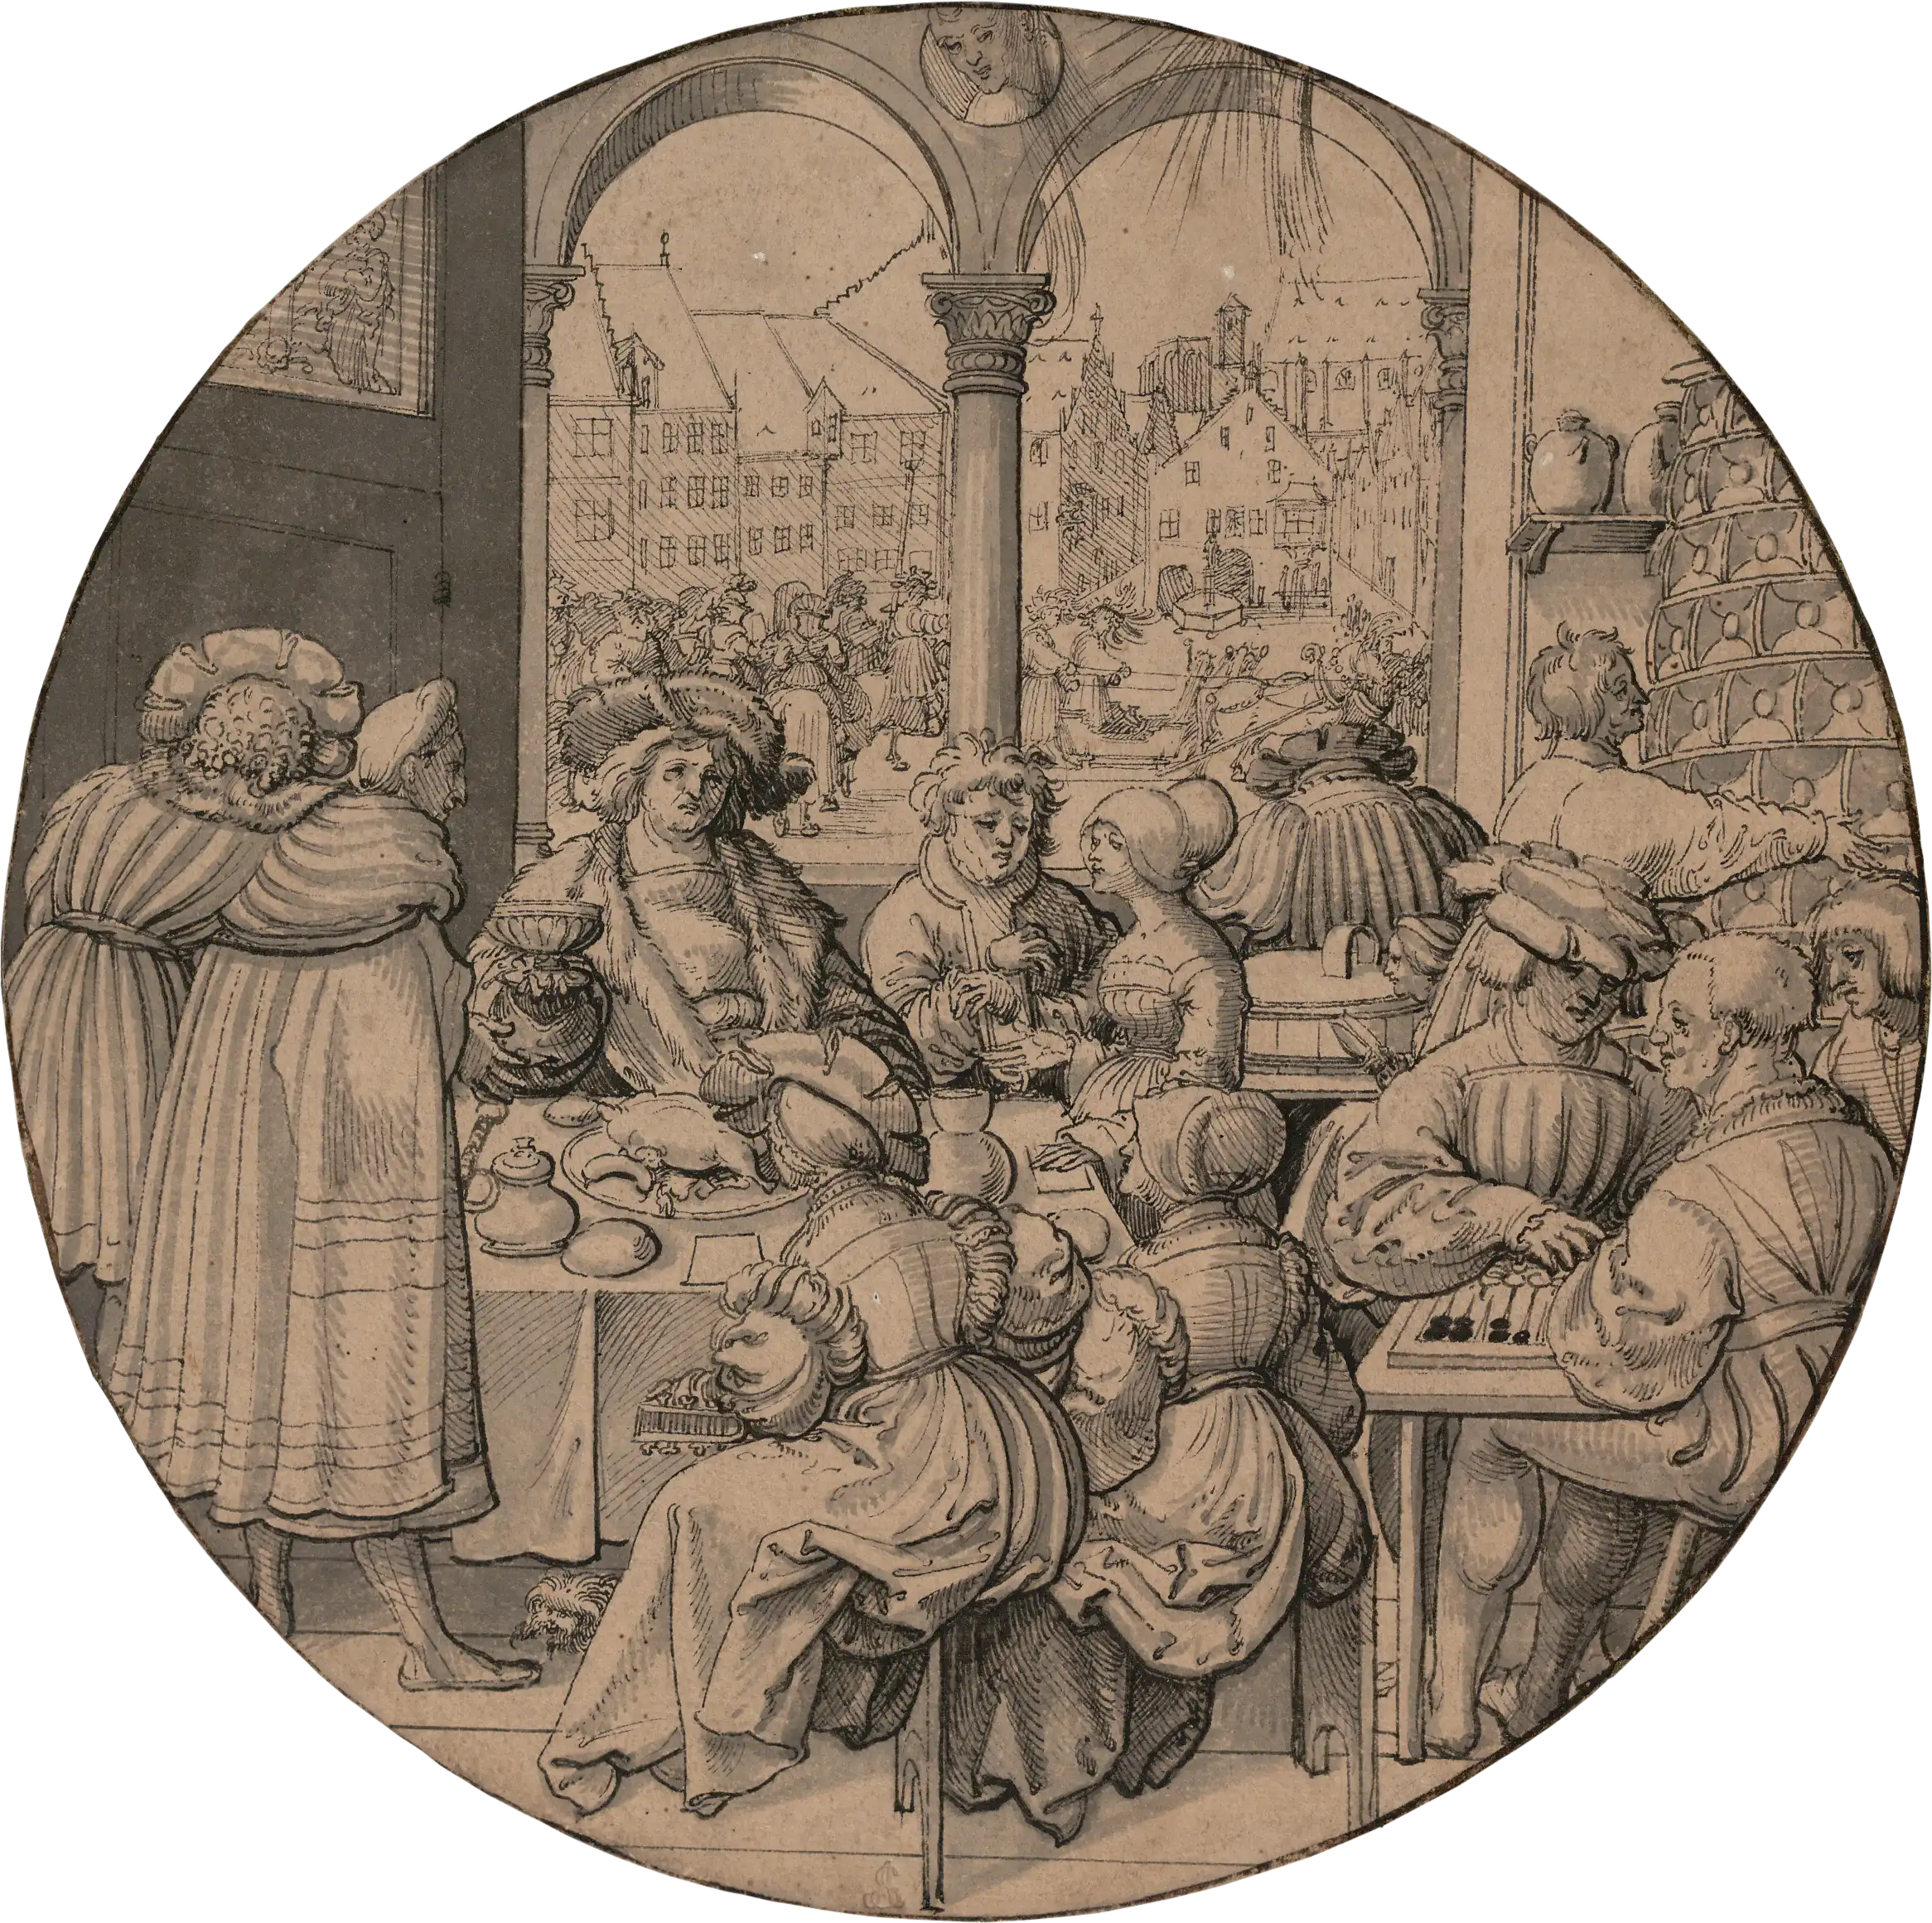 Jörg Breu the Elder, Design for a painted glass roundel representing the month of January, ca. 1520